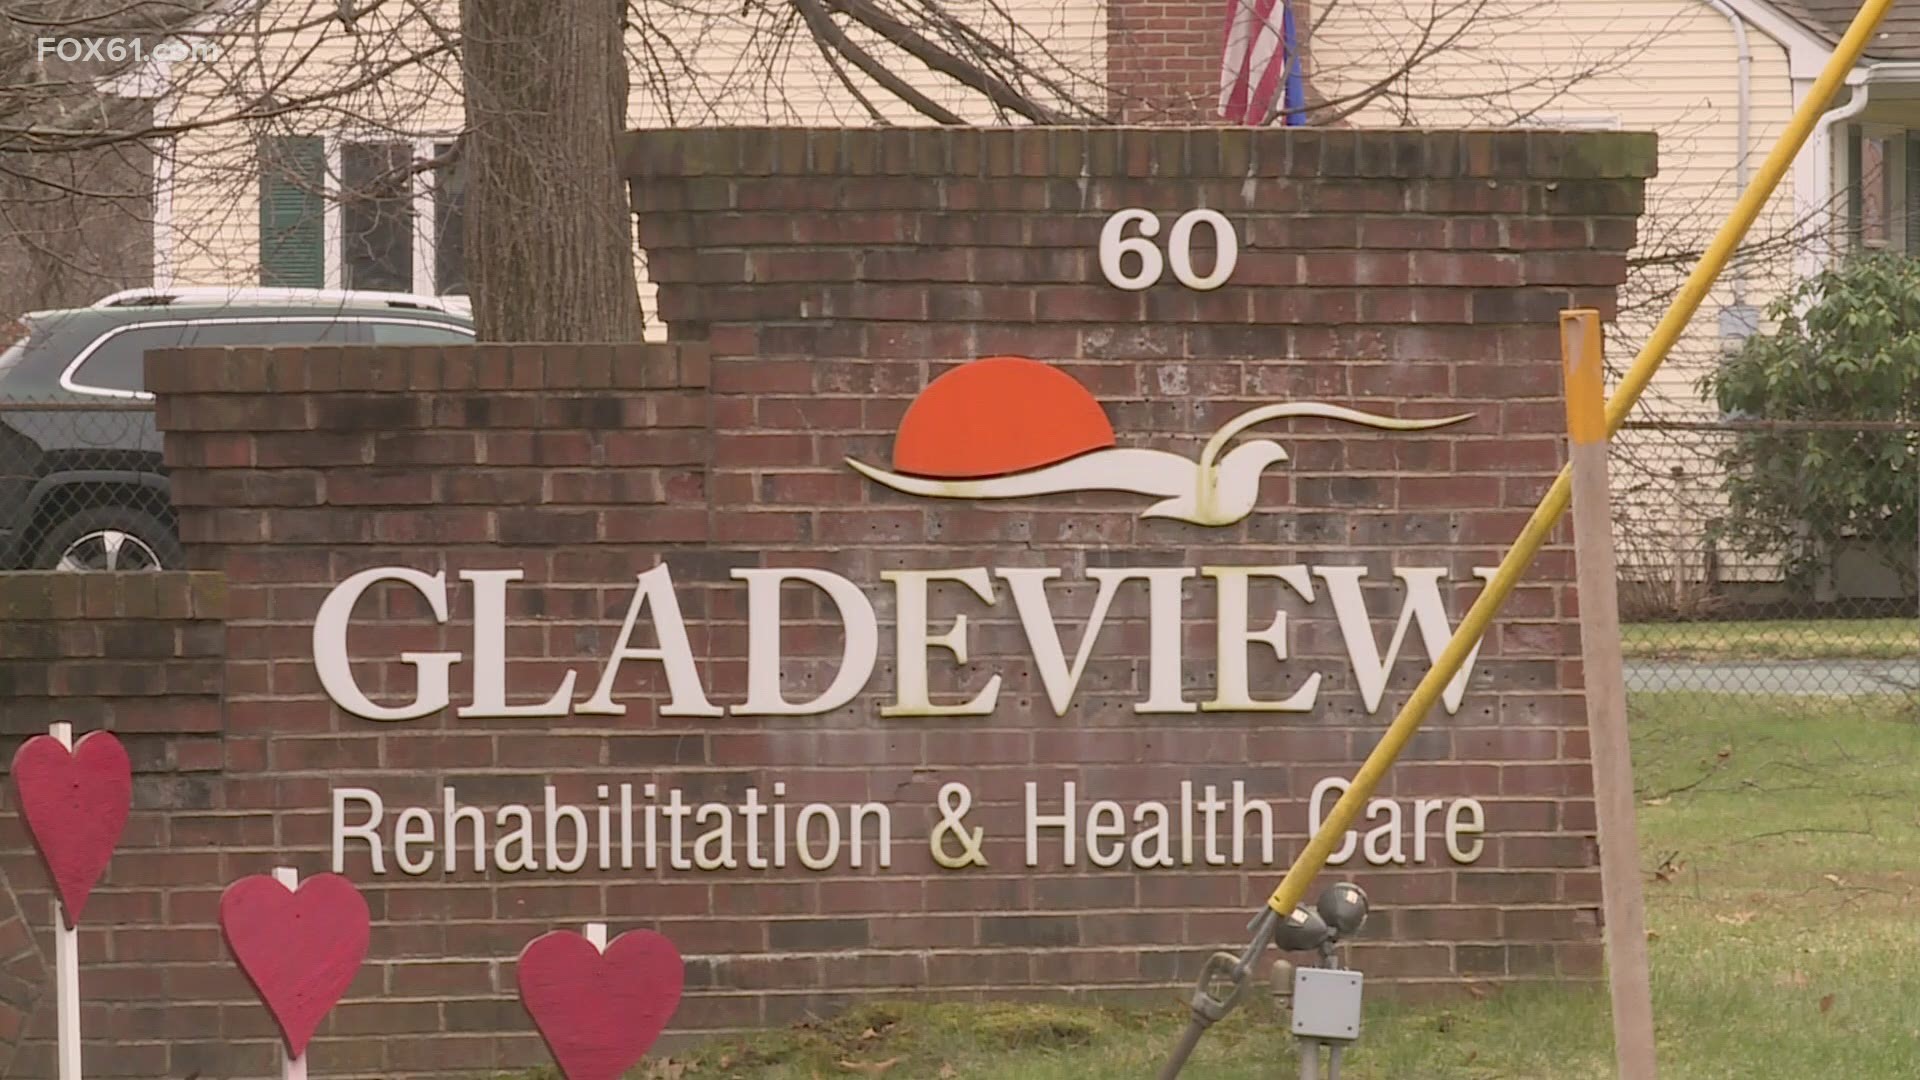 Dozens of staff and more than half the residents have tested positive.